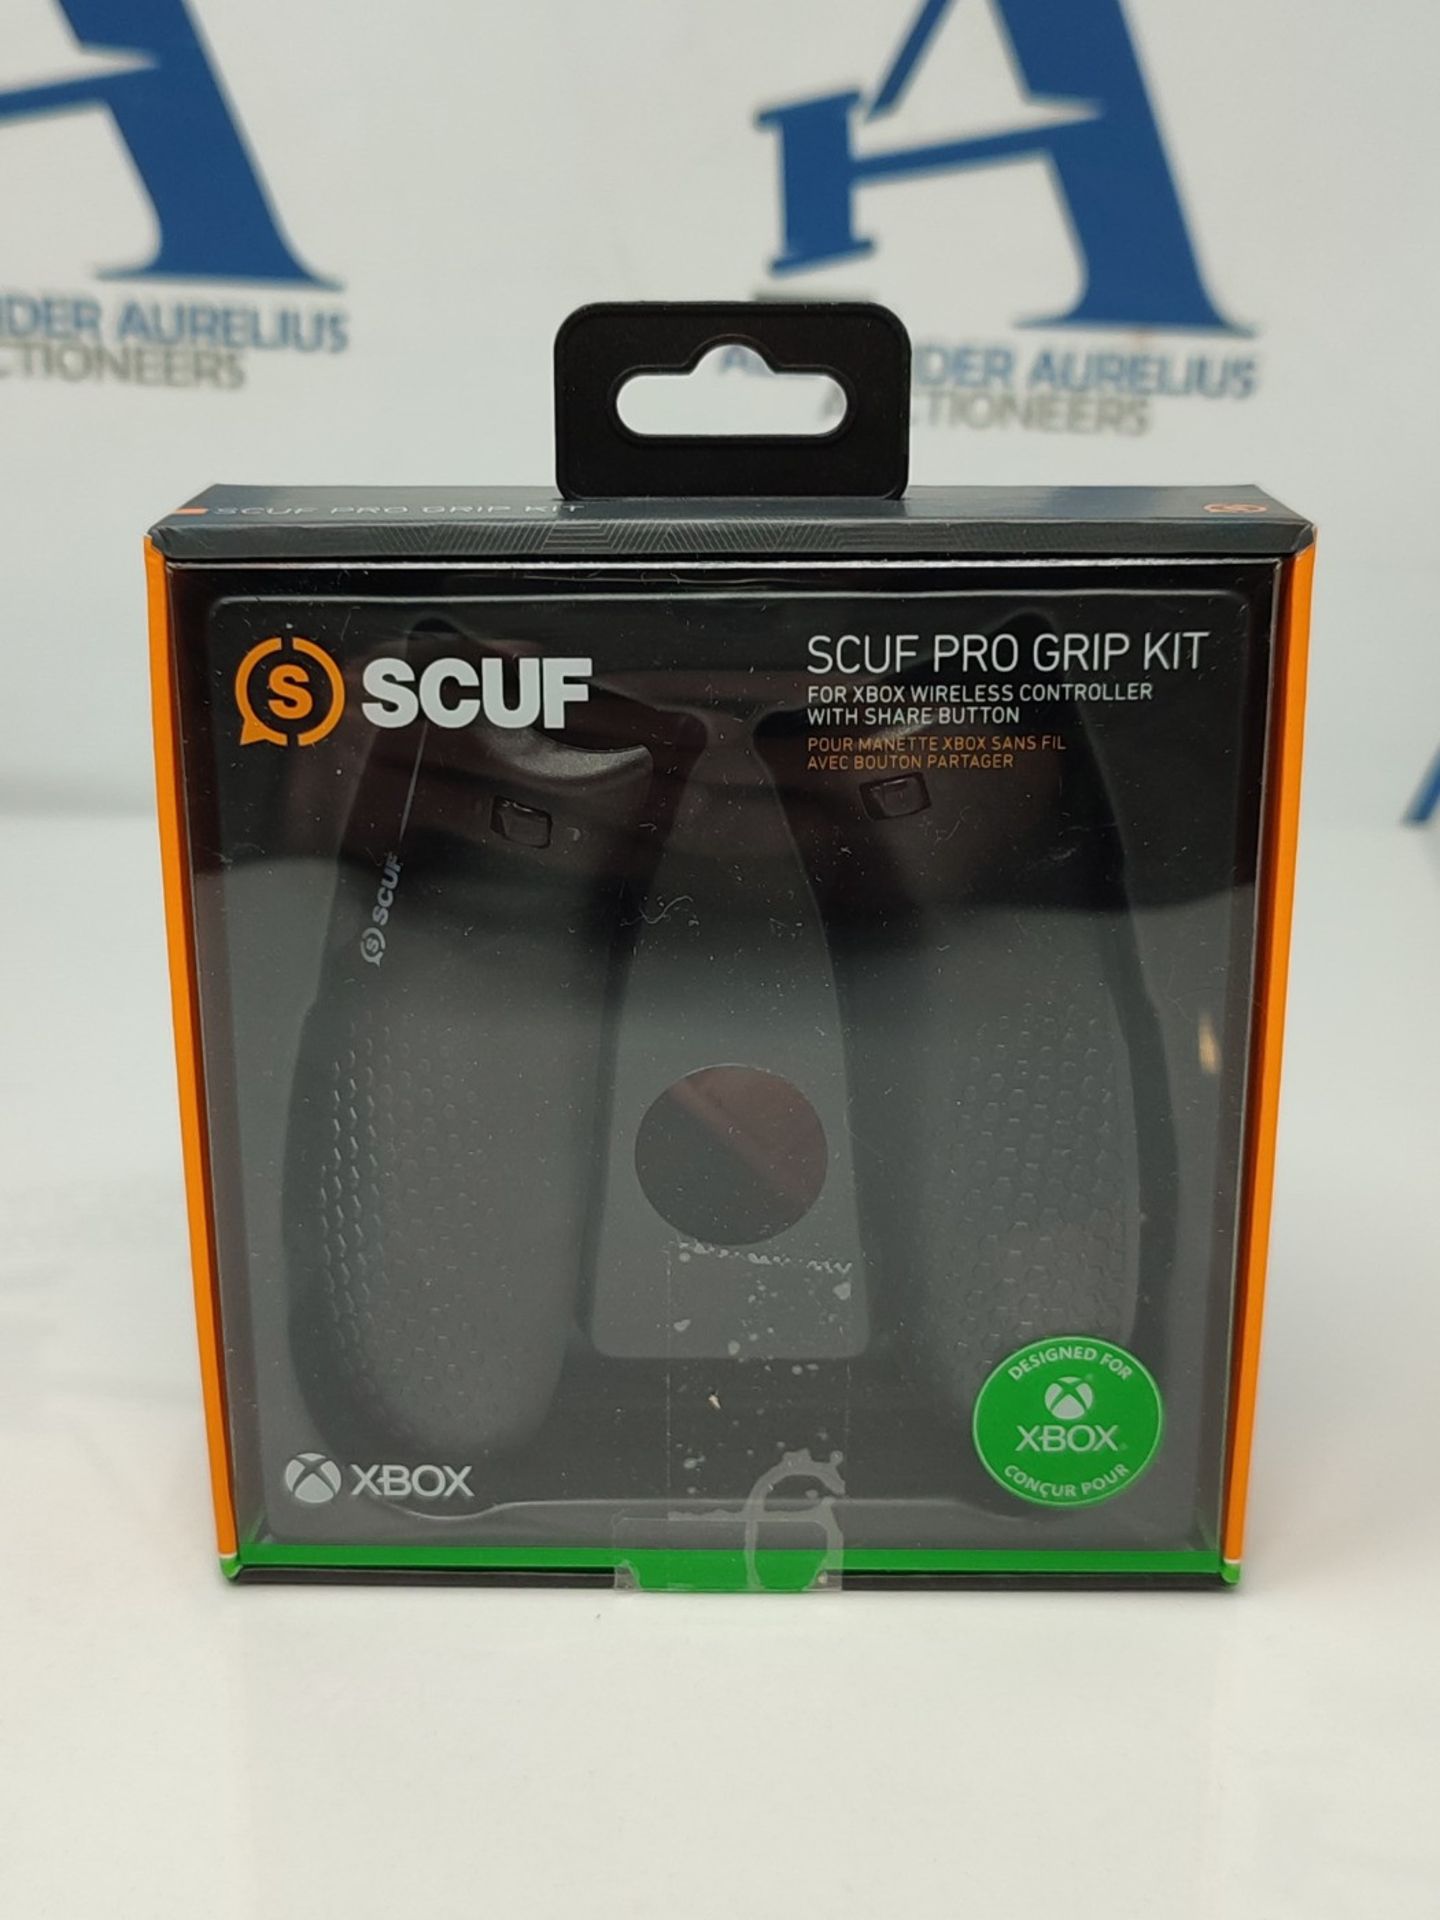 SCUF Pro Triggers Grip Kit for XBOX Wireless Controllers with Share Button - Black - Image 2 of 3